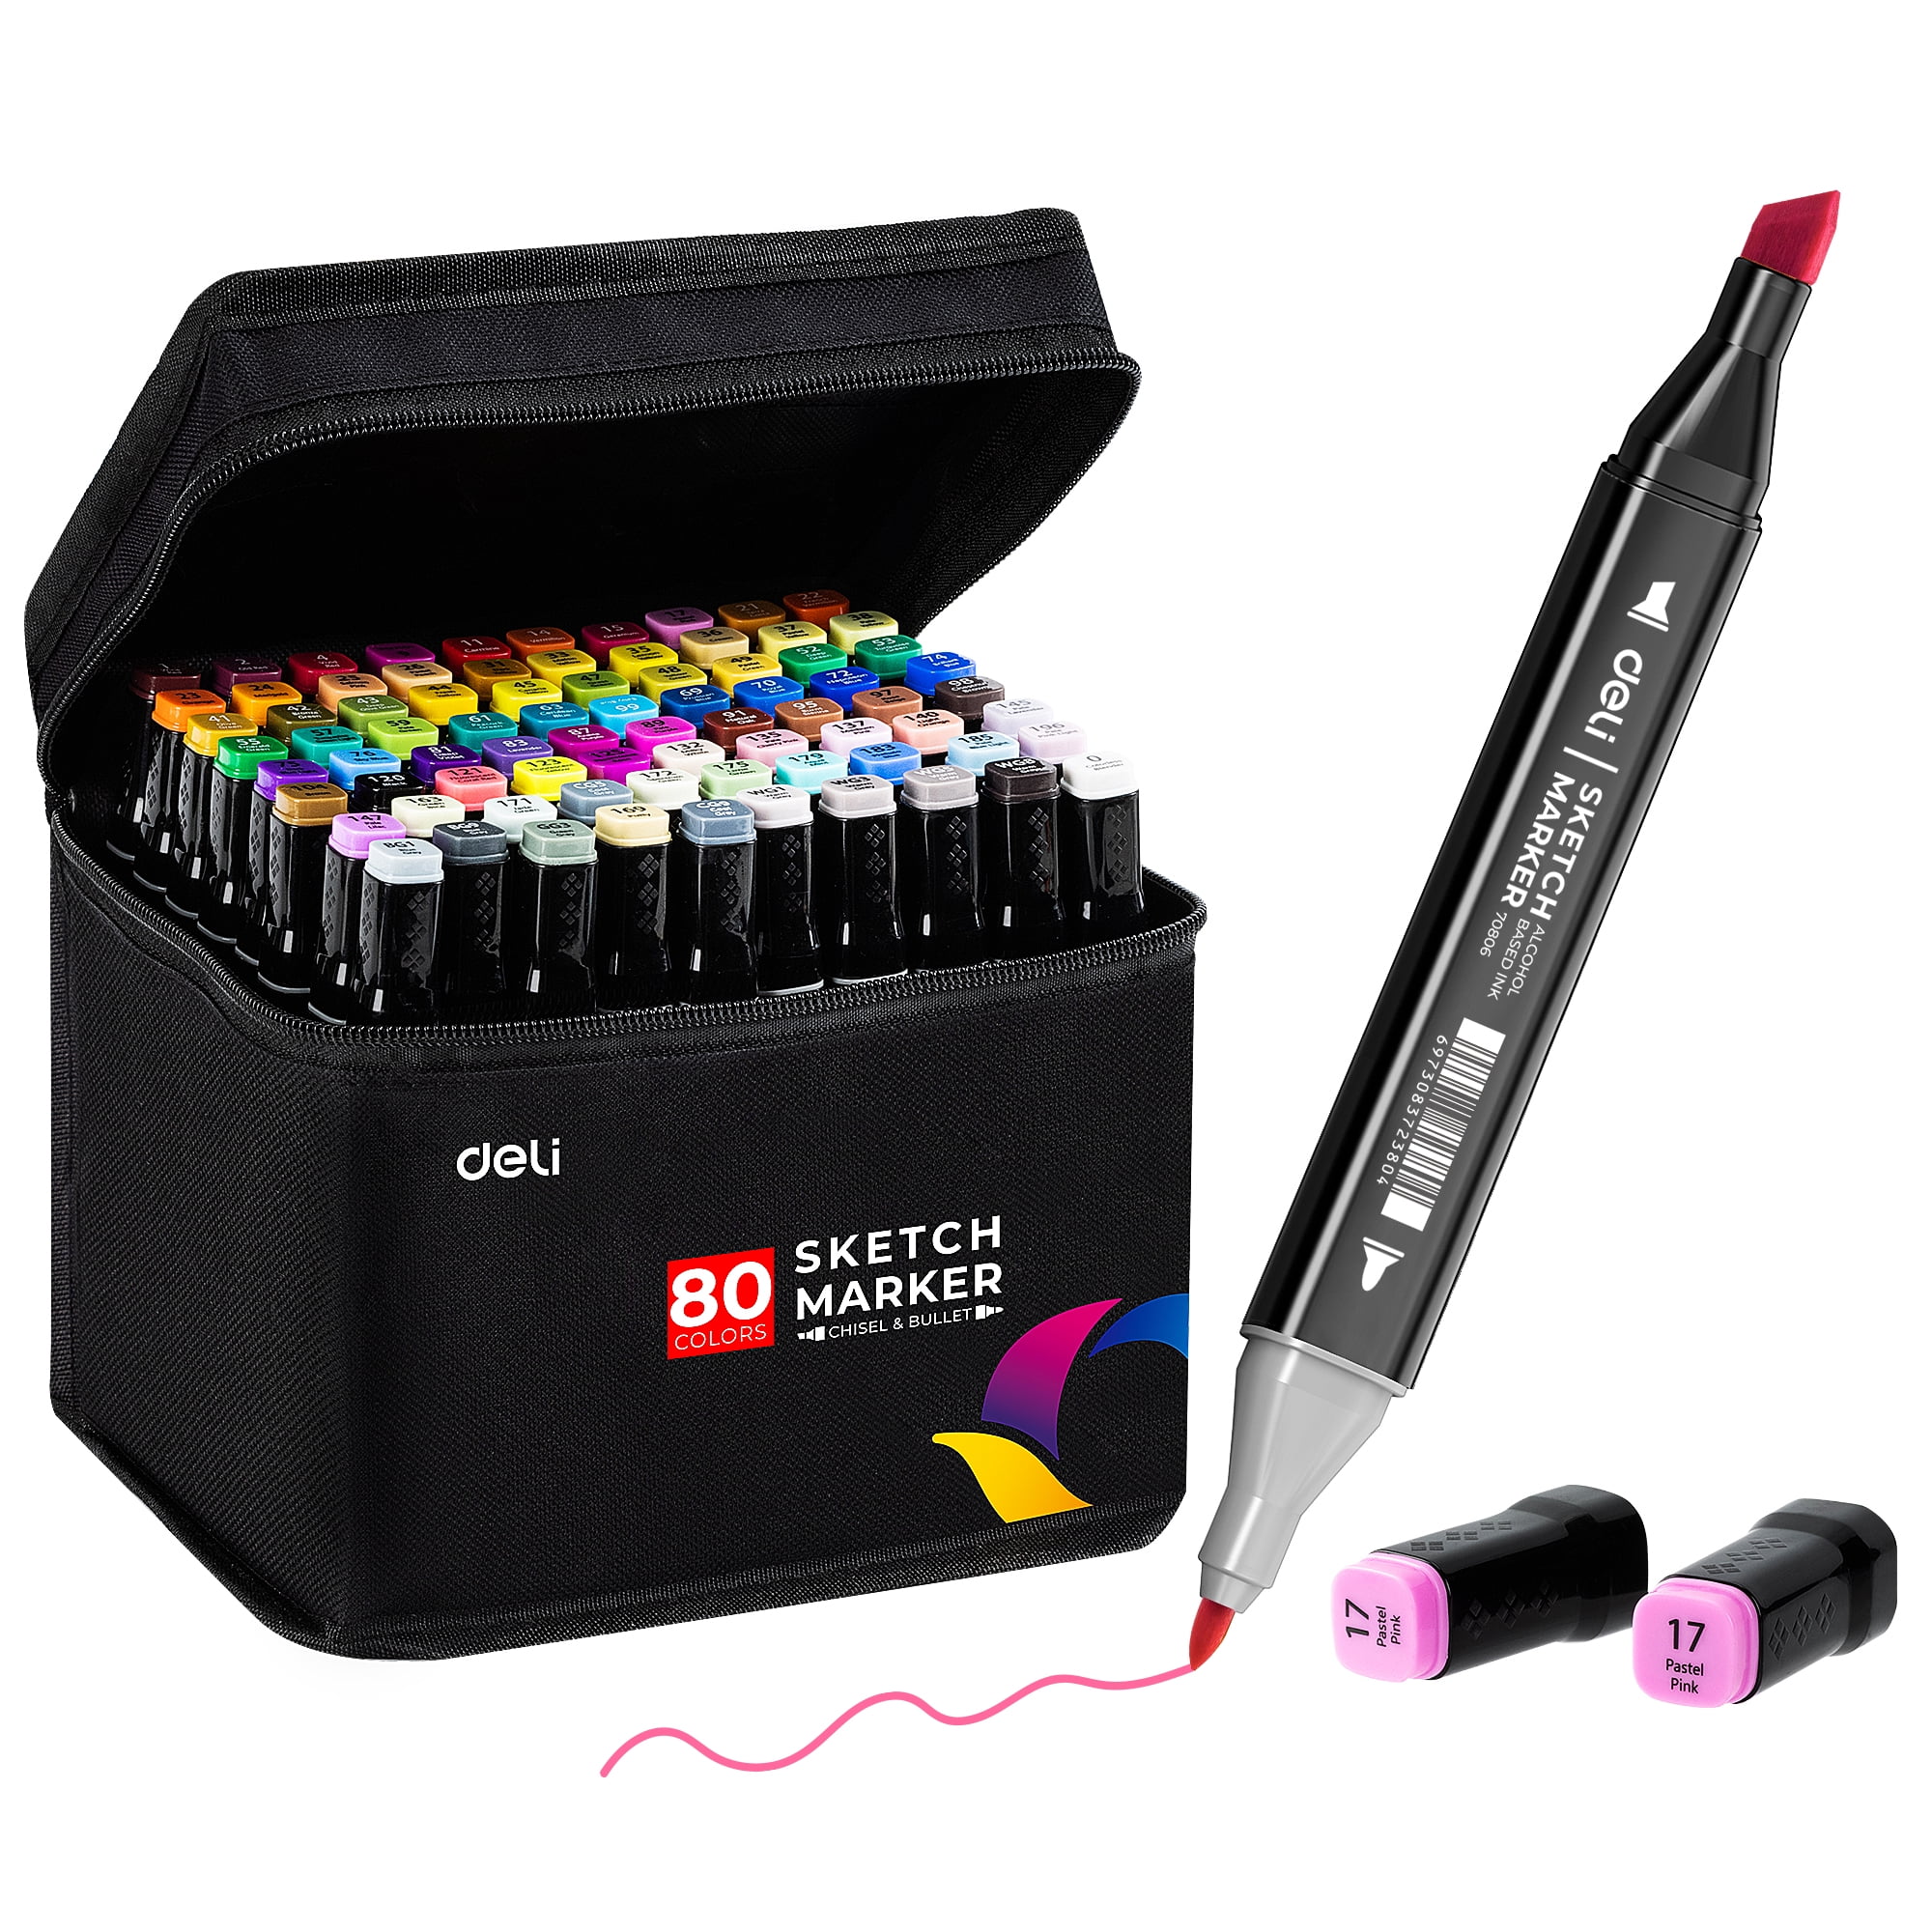 3 bags with 80 double-sided colored markers/pencils in each bag